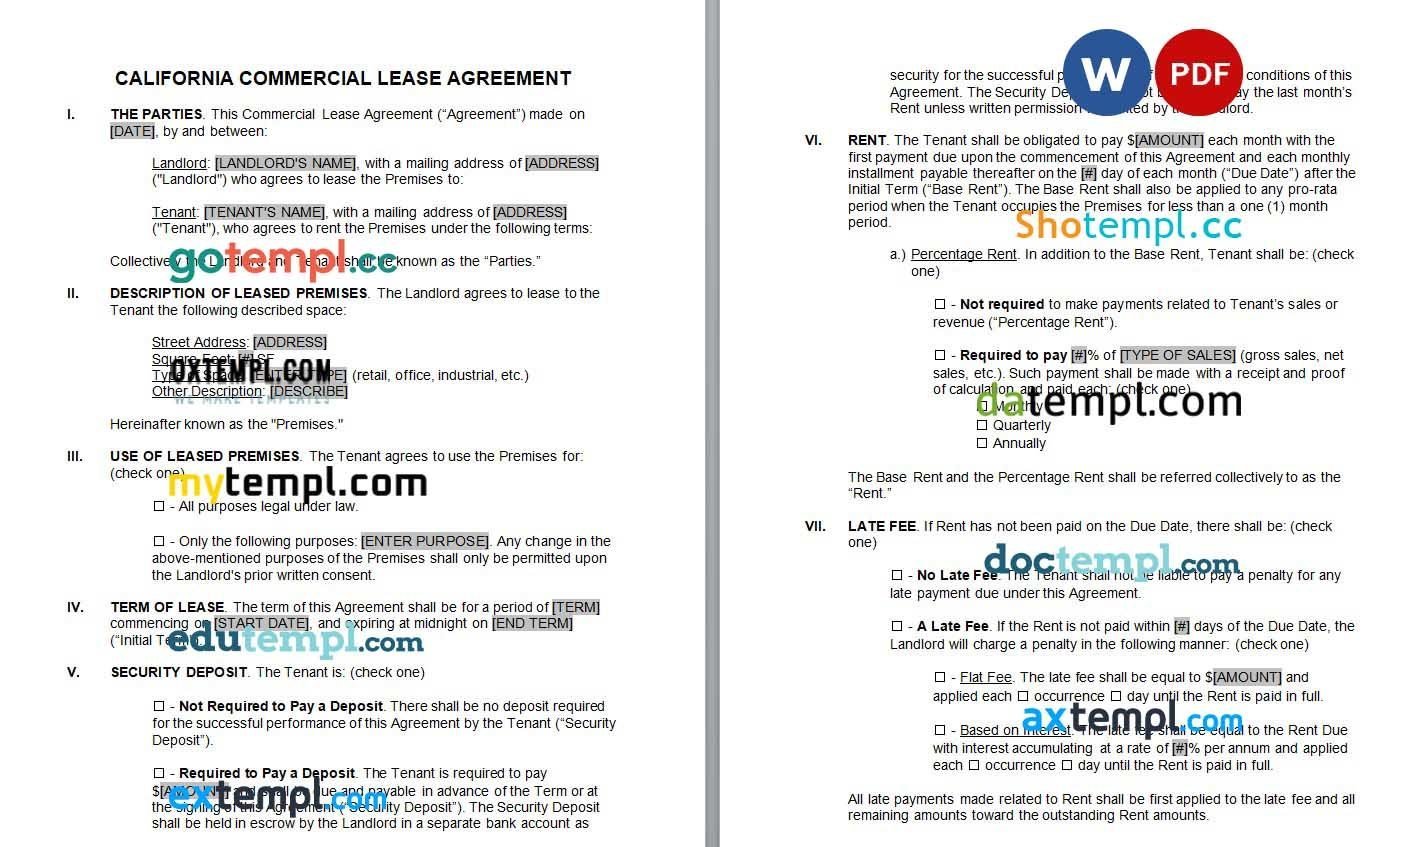 California Commercial Lease Agreement Word example, fully editable